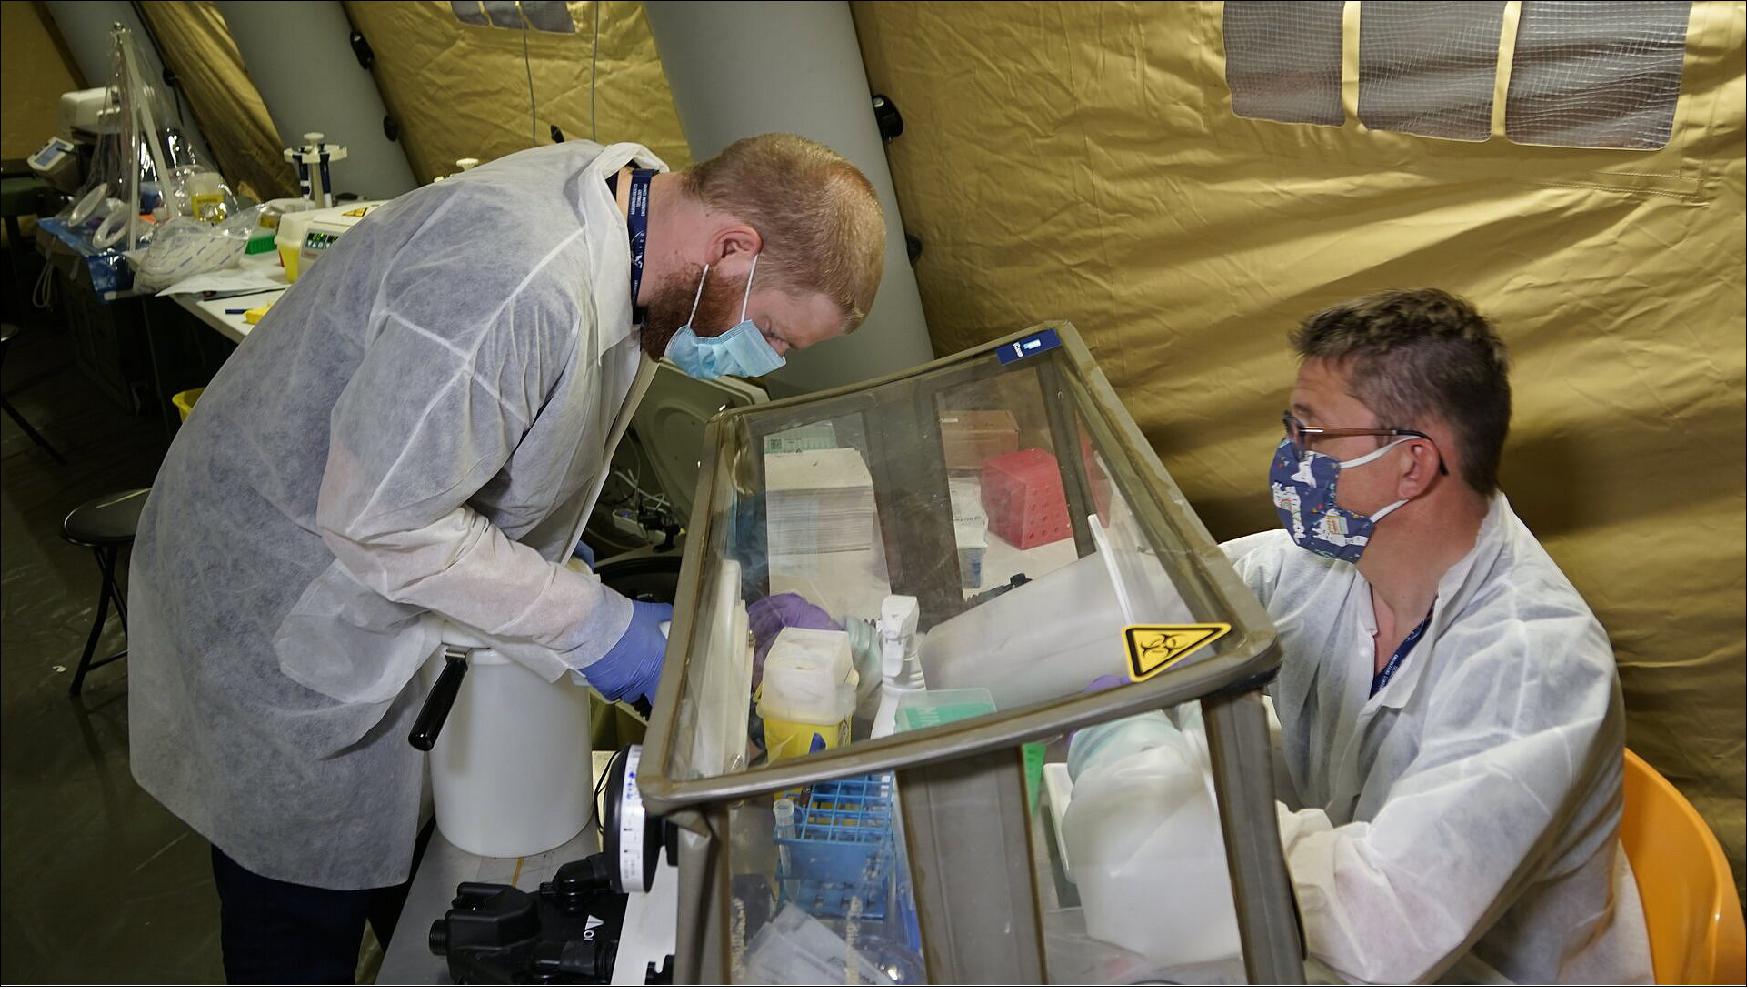 Figure 3: A sample is transferred for COVID-19 testing inside the mobile bio-lab in Piedmont (image credit: ESA)